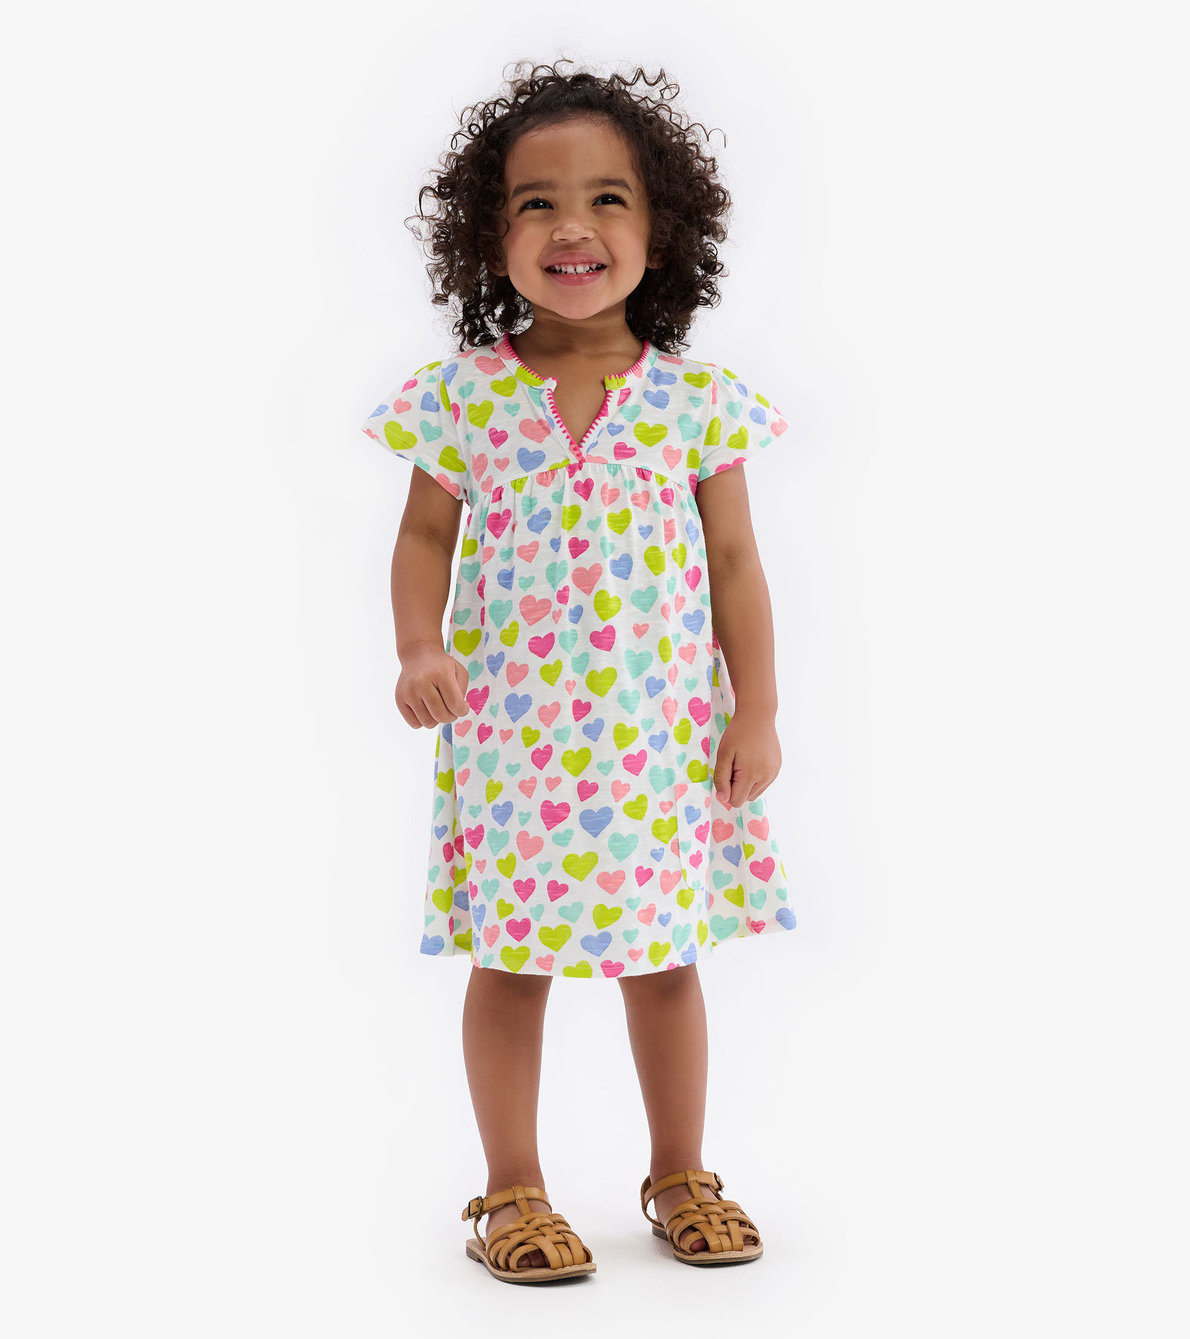 View larger image of Bubble Hearts Toddler Pocket Puff Dress